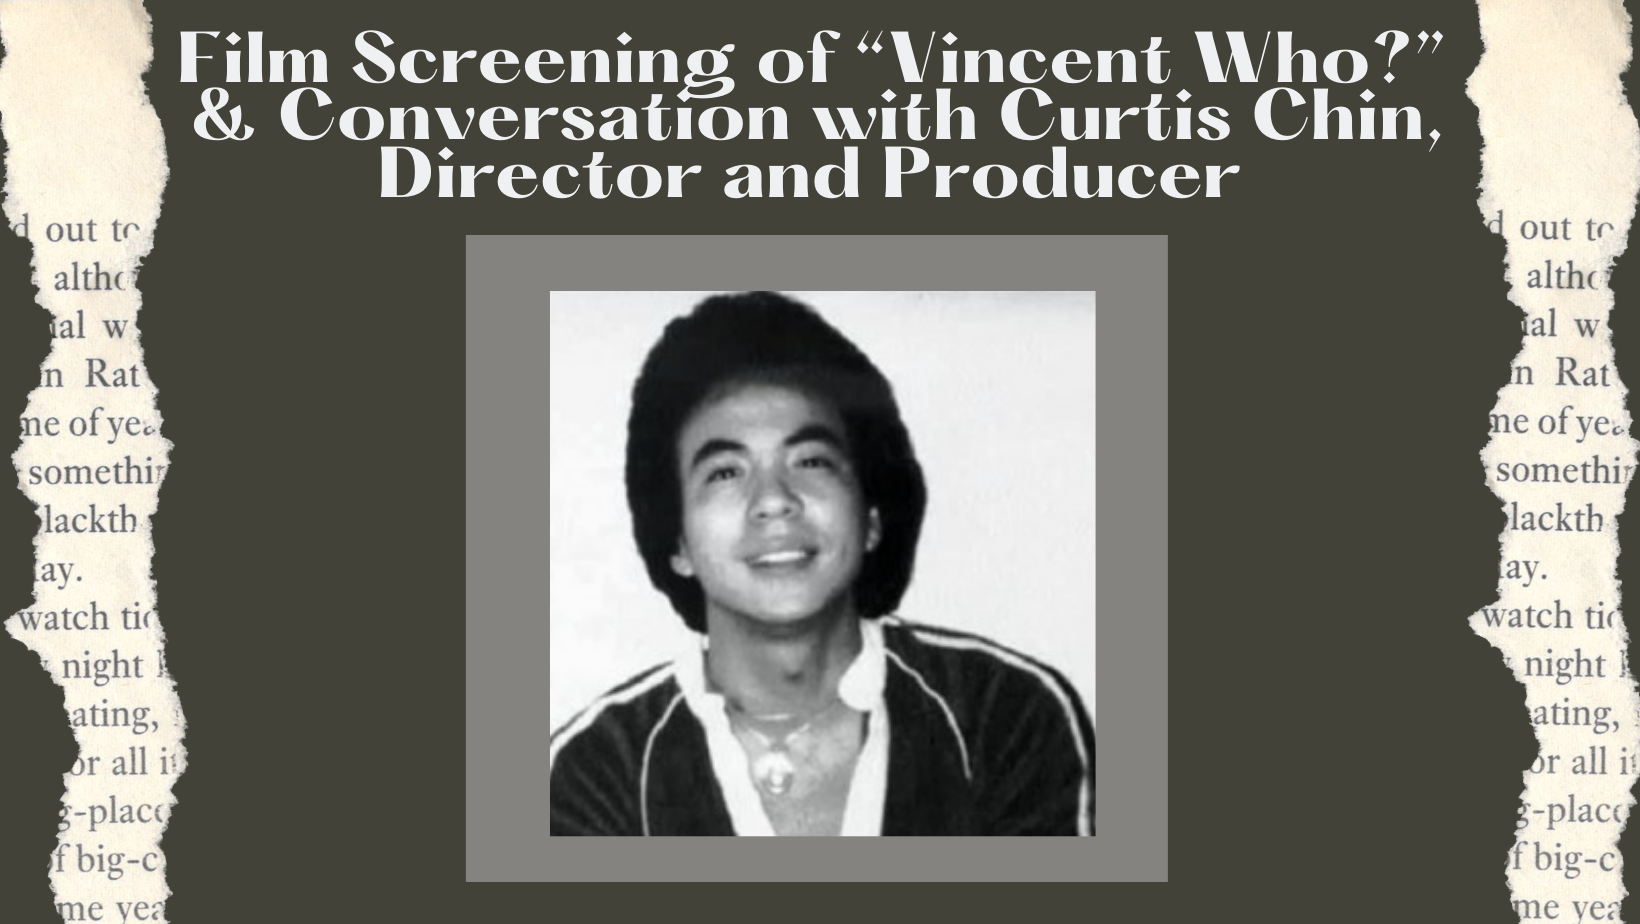 black and white image of a person with short hair smiling at the camera. above the picture it states "film screening of "vincent who"